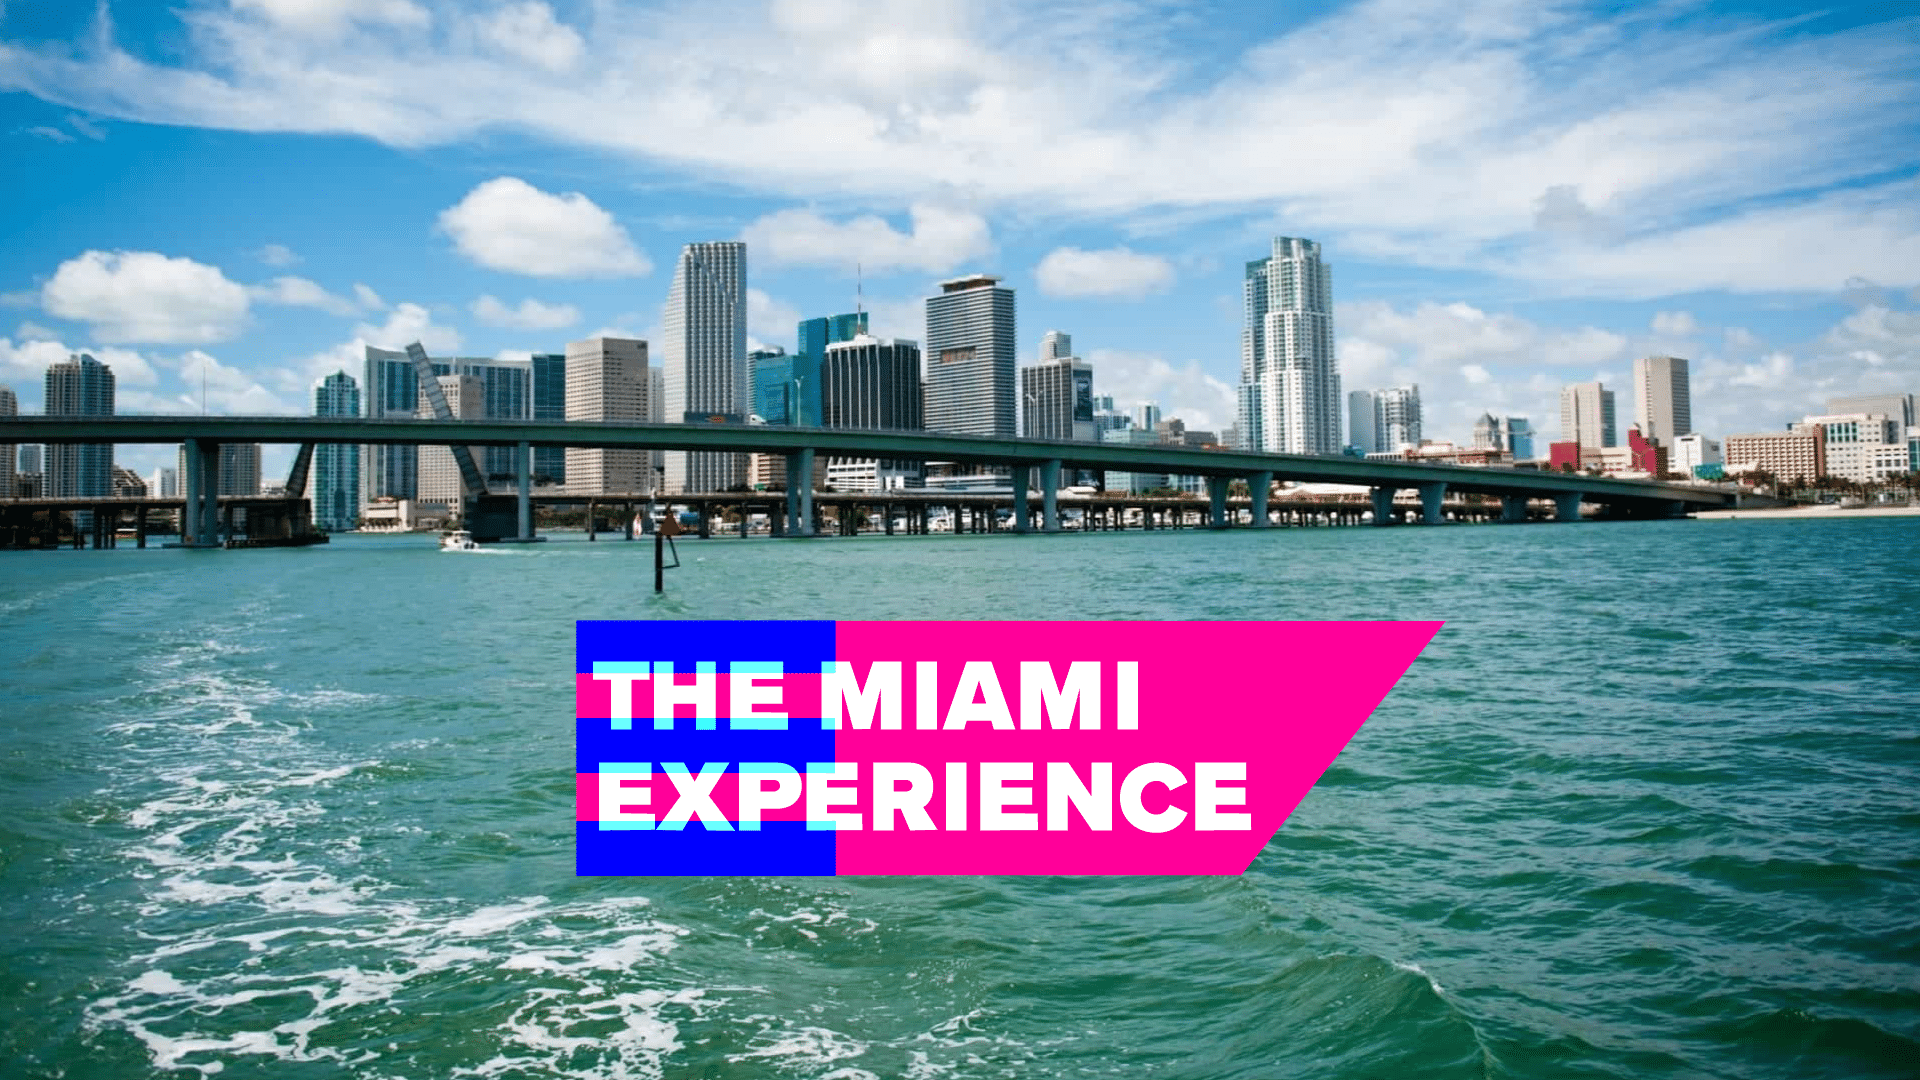 Miami Booze Cruise Party Boat, Package Deal - Trusted Company 10+ Years  Tickets, Multiple Dates